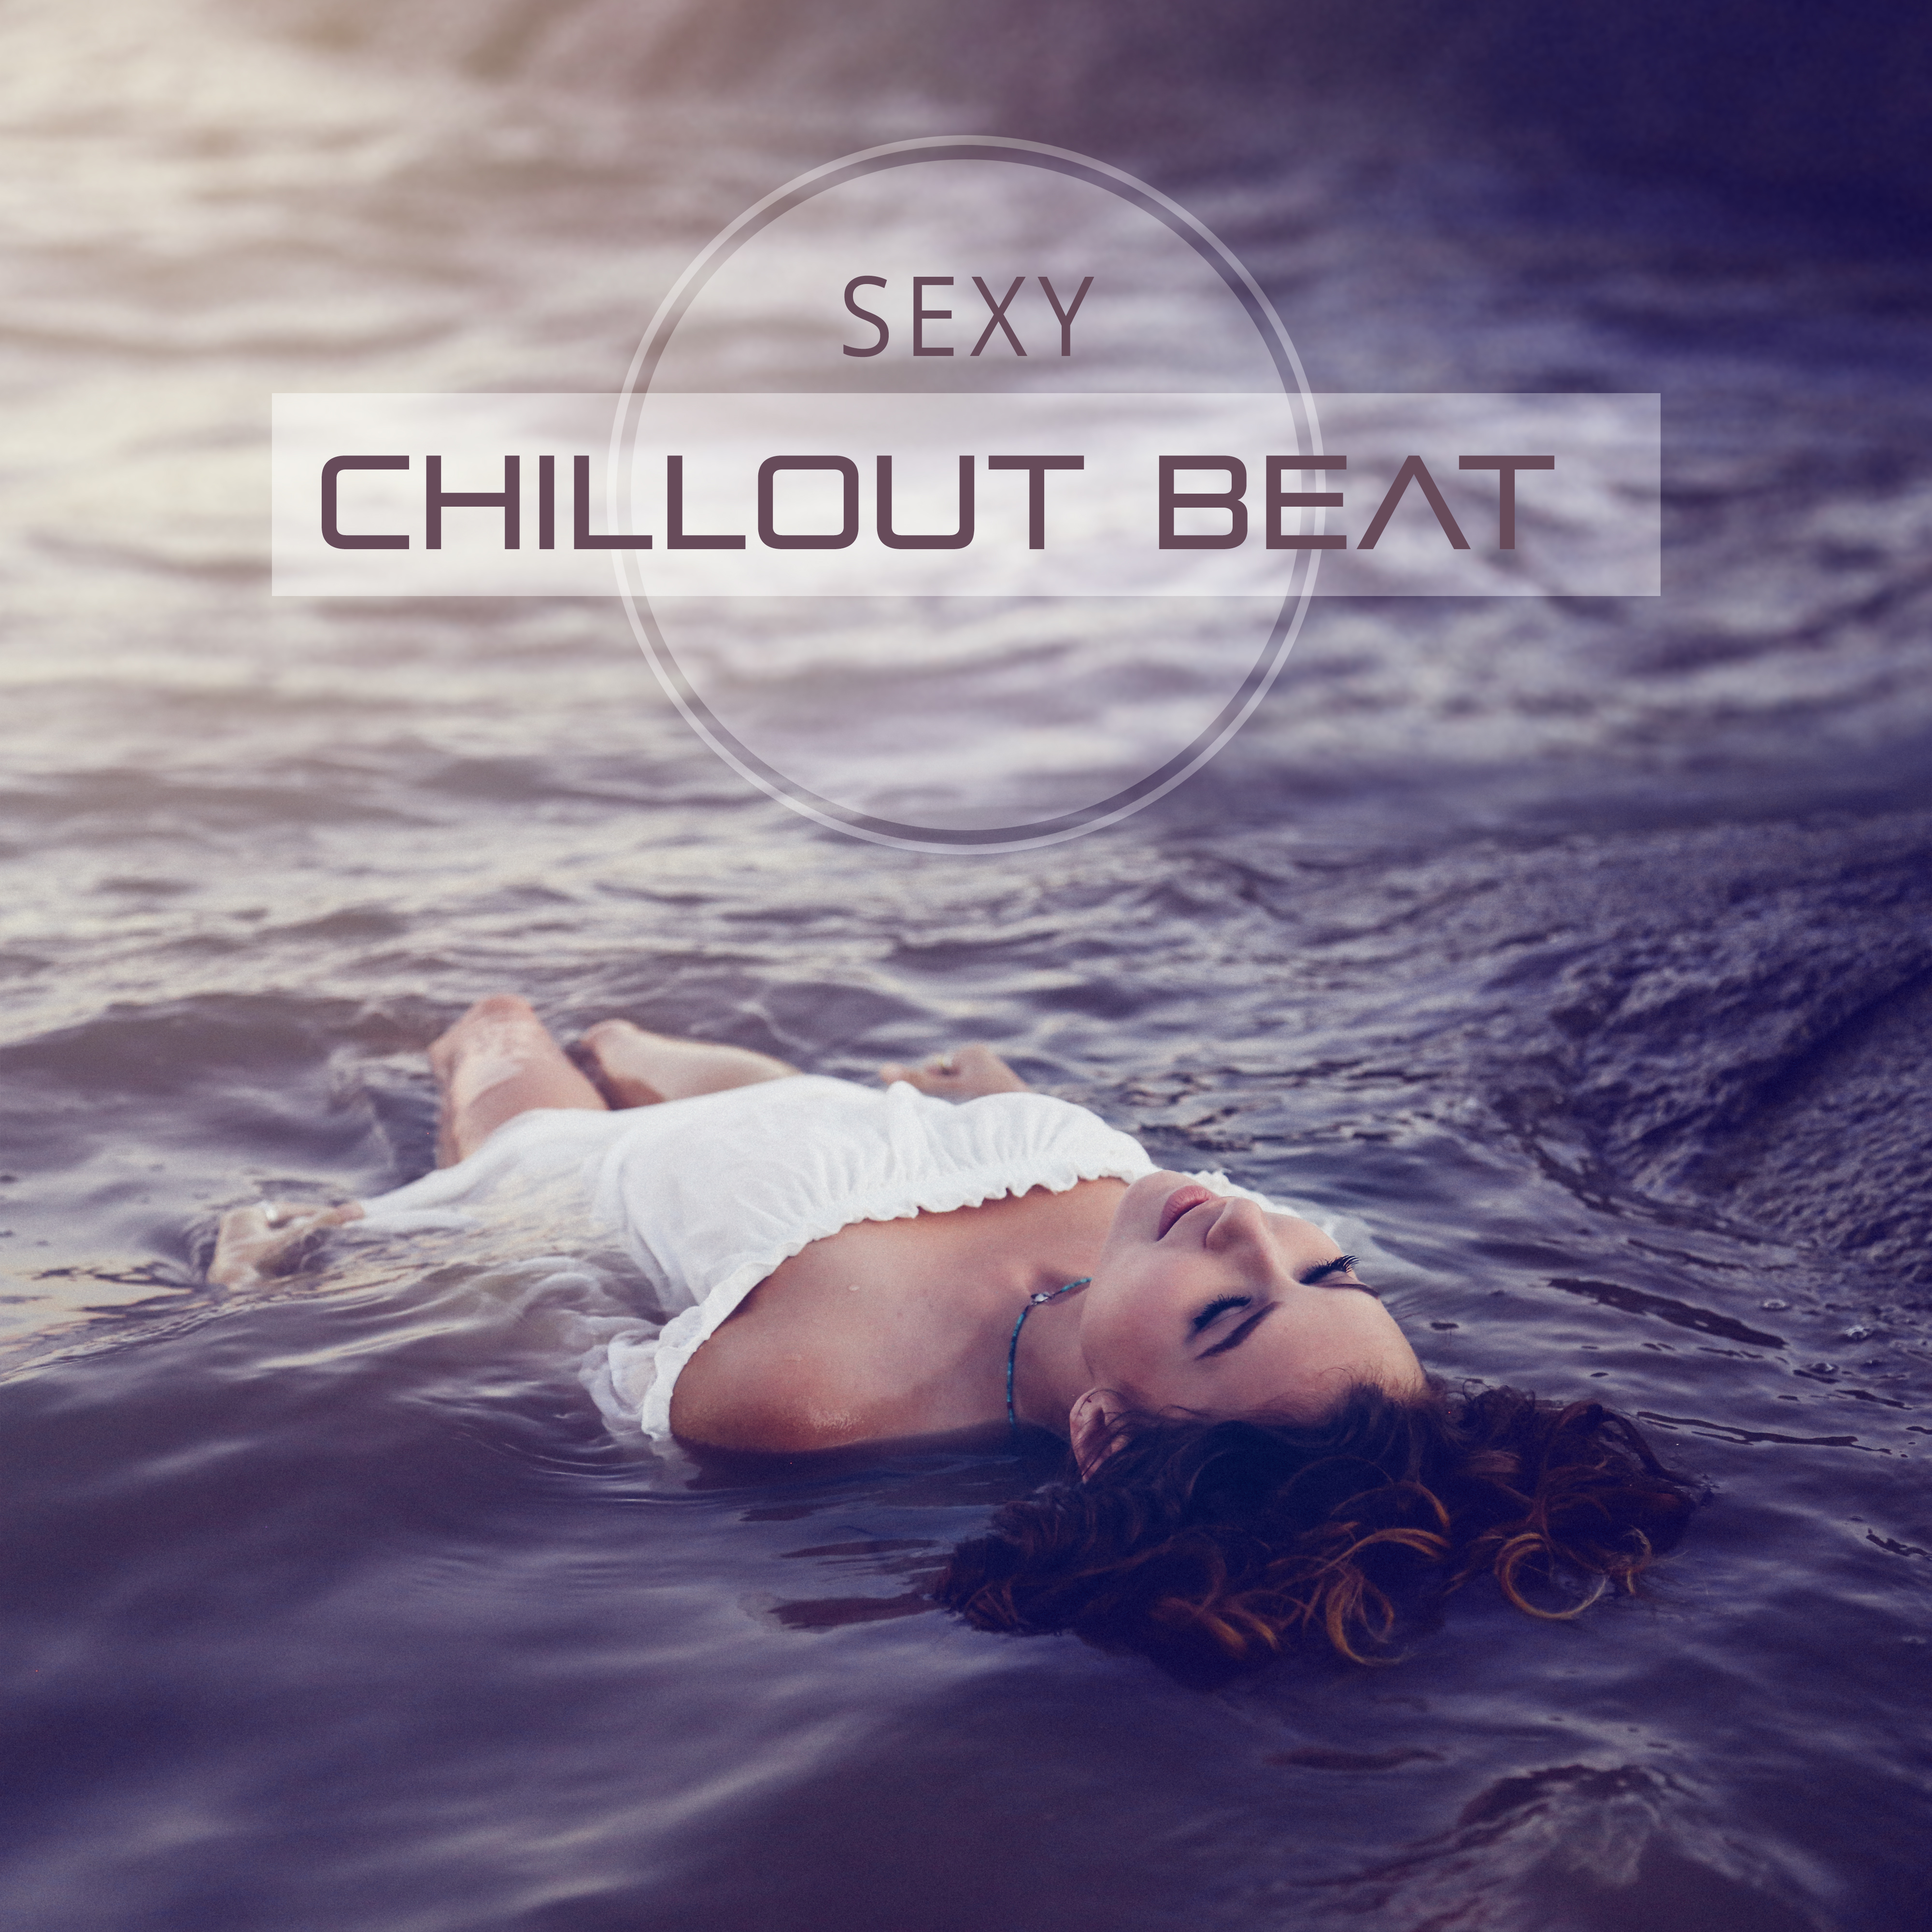 Chillout Beat  Chill Out Music,  Dance Moves, Beach Drinks, Hot Night, Moonlight